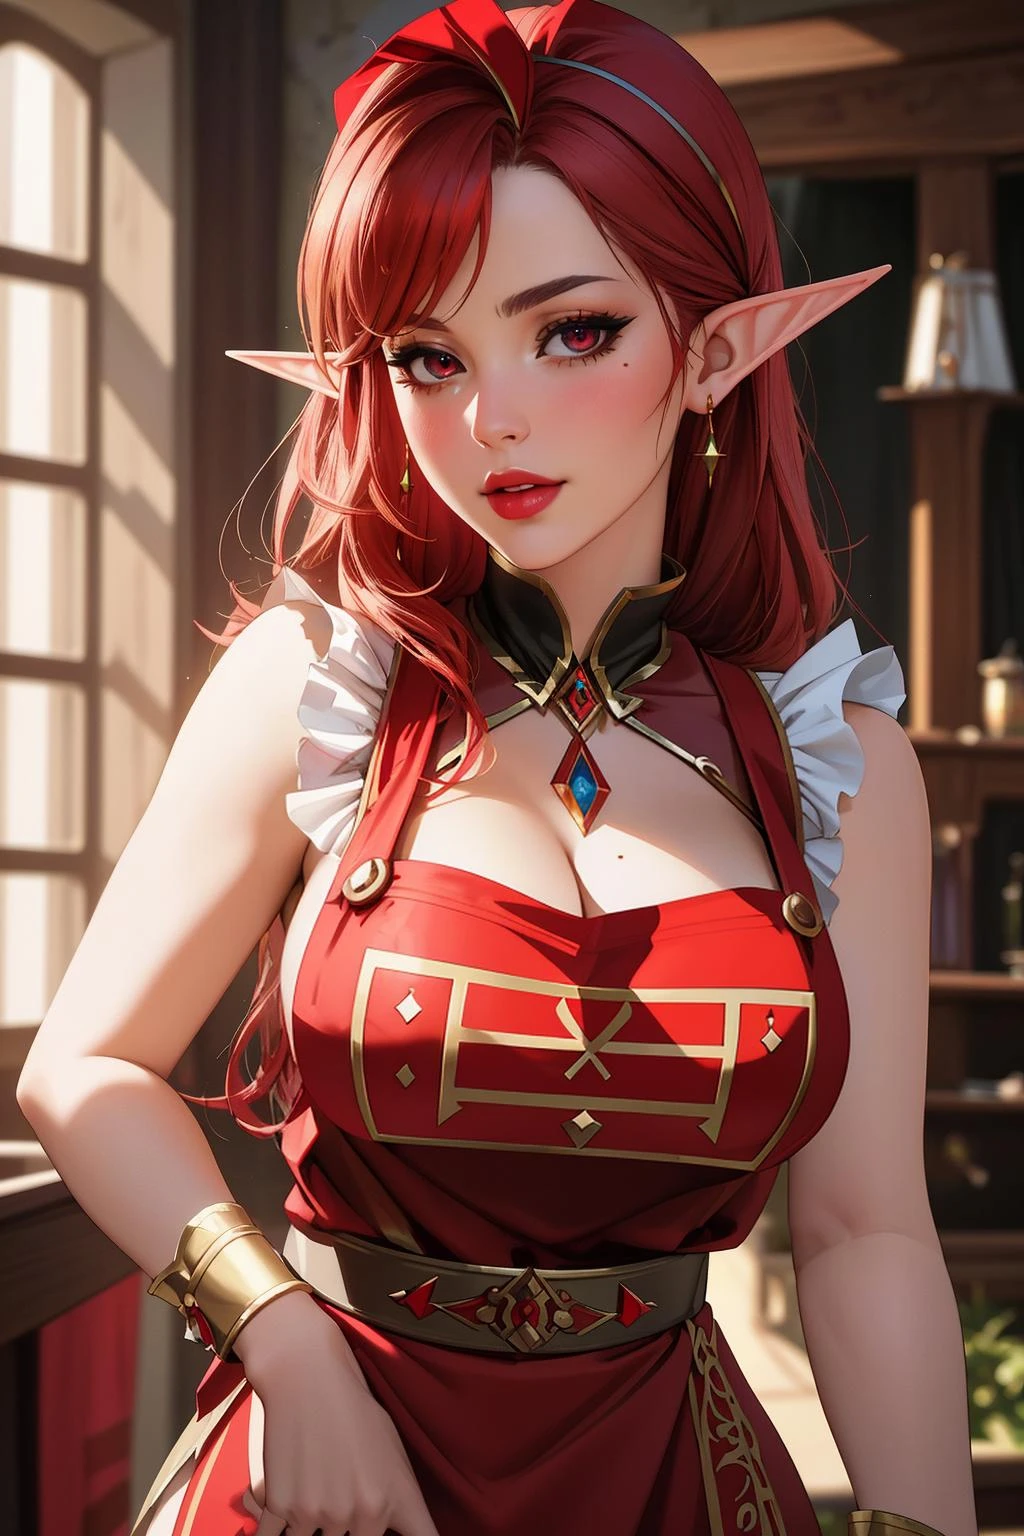 ((Masterpiece, best quality,edgQuality))
edgBE, a woman in a red and gold apron,wearing (edgBE edgApron),elf 
 